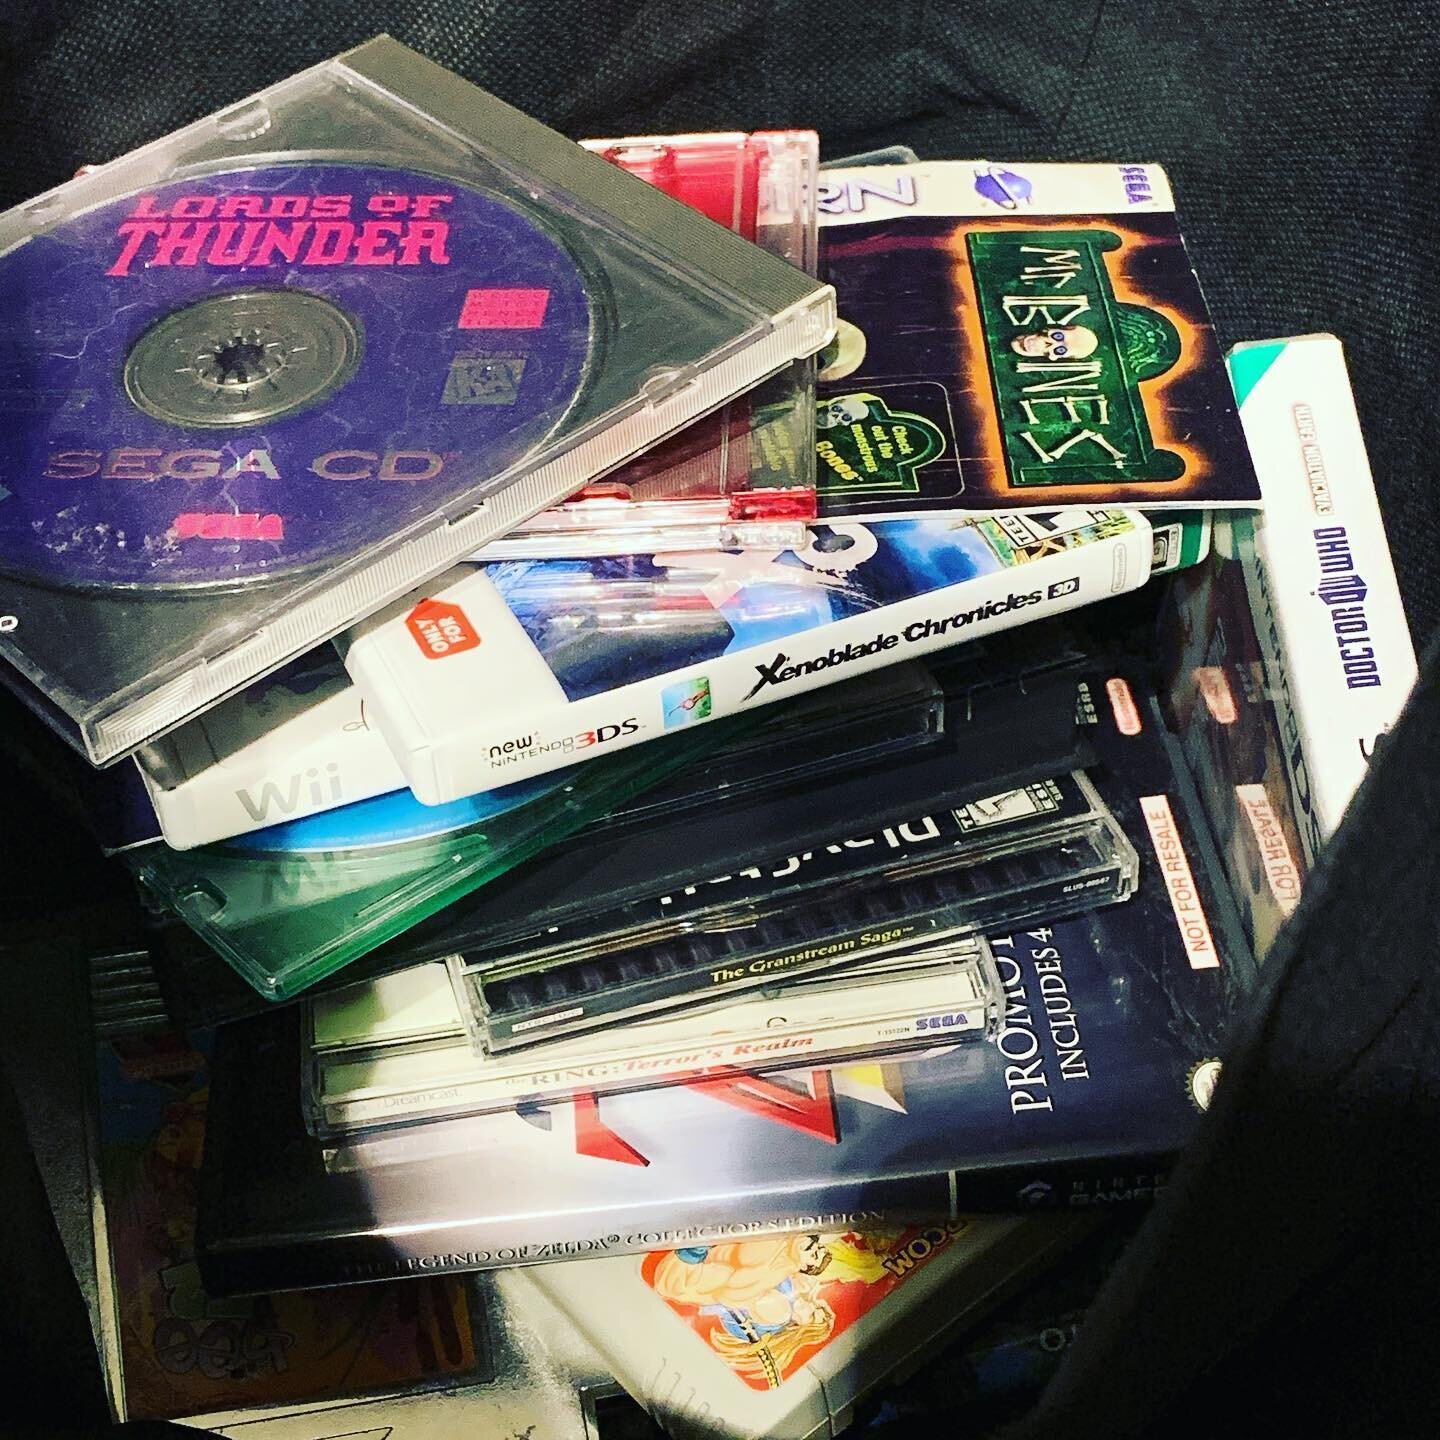 Recently, I&rsquo;ve spent my spare days finally organizing and inventorying my personal game room. This is just 1 bag of doubles I found, once I finally kept proper track of everything. 😅 -Frank